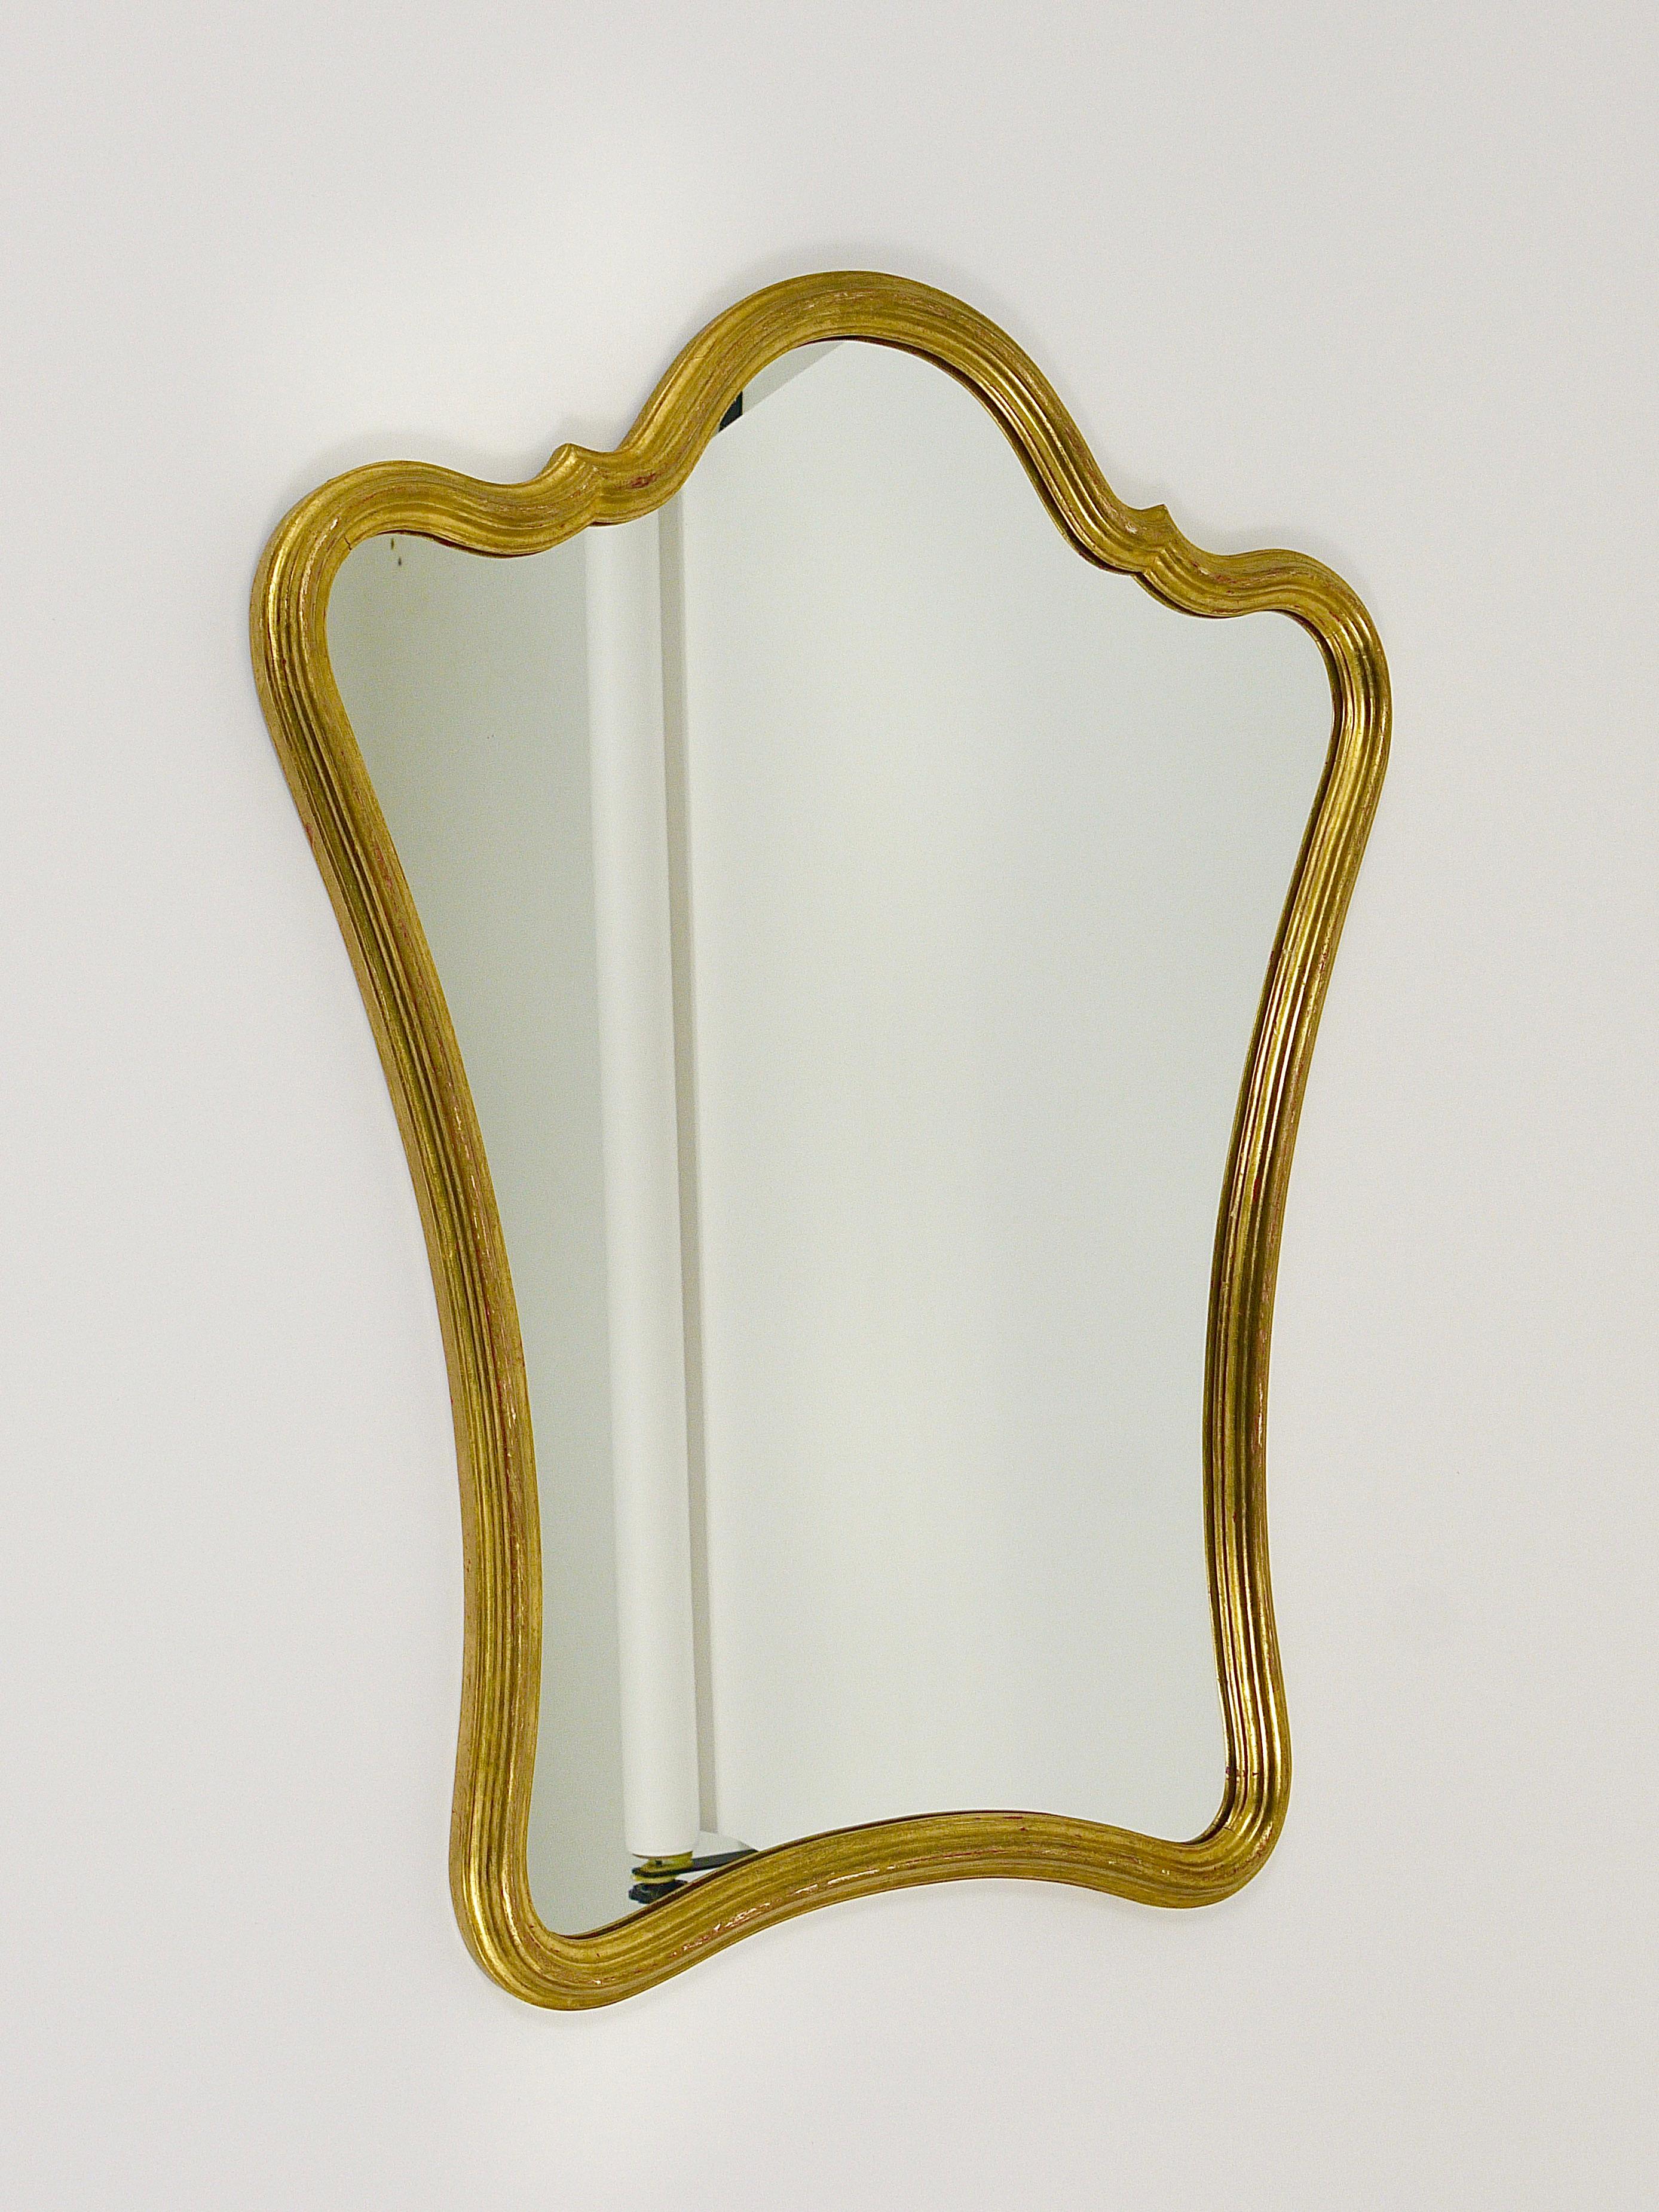 Mid-Century Modern Chelini Firenze Curved Gilt Wood Mid-Century Wall Mirror, Italy, 1950s For Sale